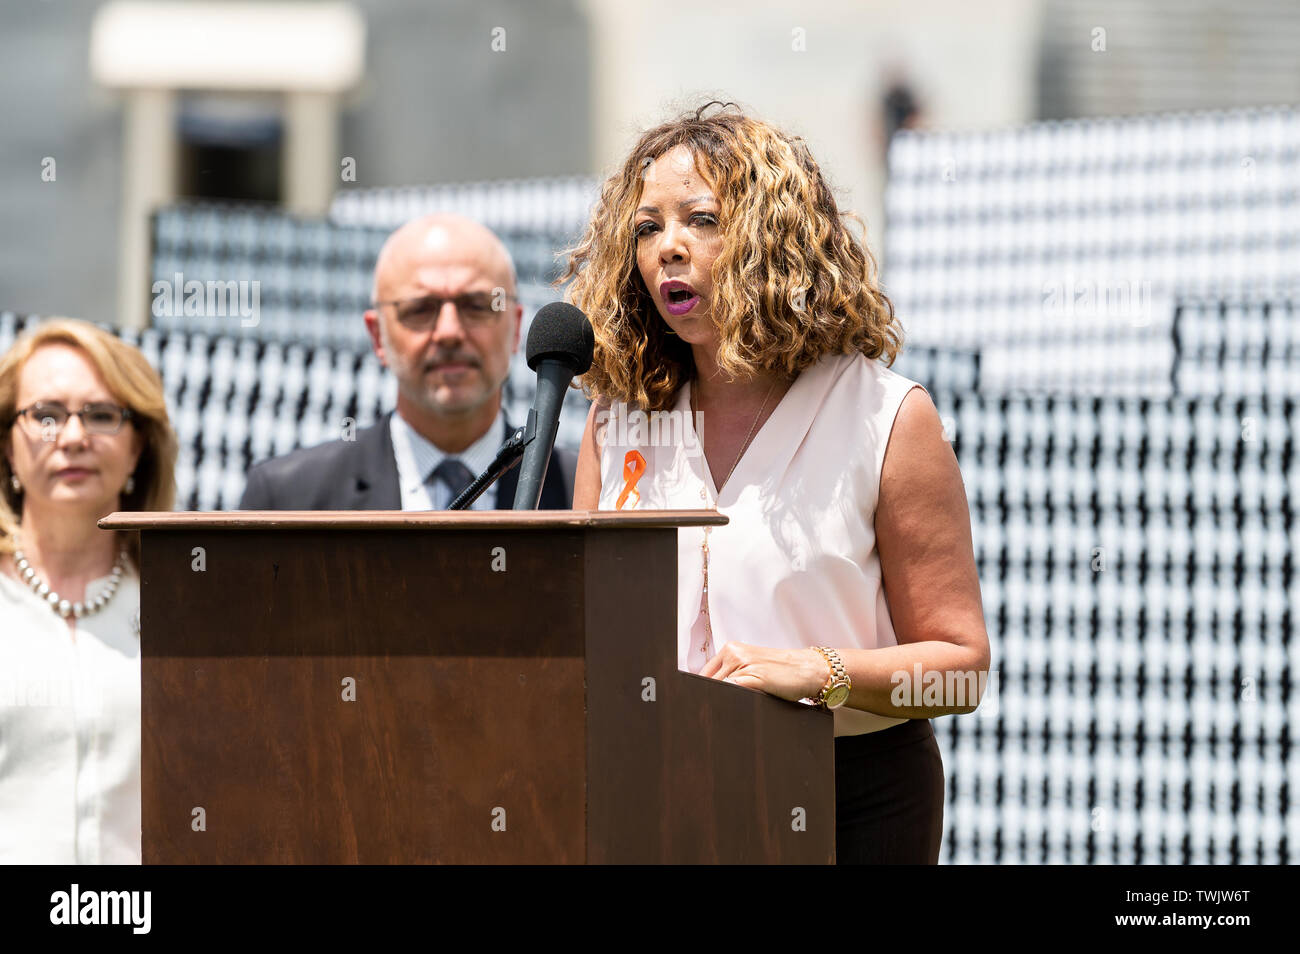 Washington, United States. 20th June, 2019. U.S. Representative Lucy McBath (D-GA) speaks during the event in front of the Capitol to urge the passage of the H.R. 8 universal (gun ownership) background checks legislation. Event was held at the grass on the eastern side of the U.S. Capitol in Washington, DC. Credit: SOPA Images Limited/Alamy Live News Stock Photo